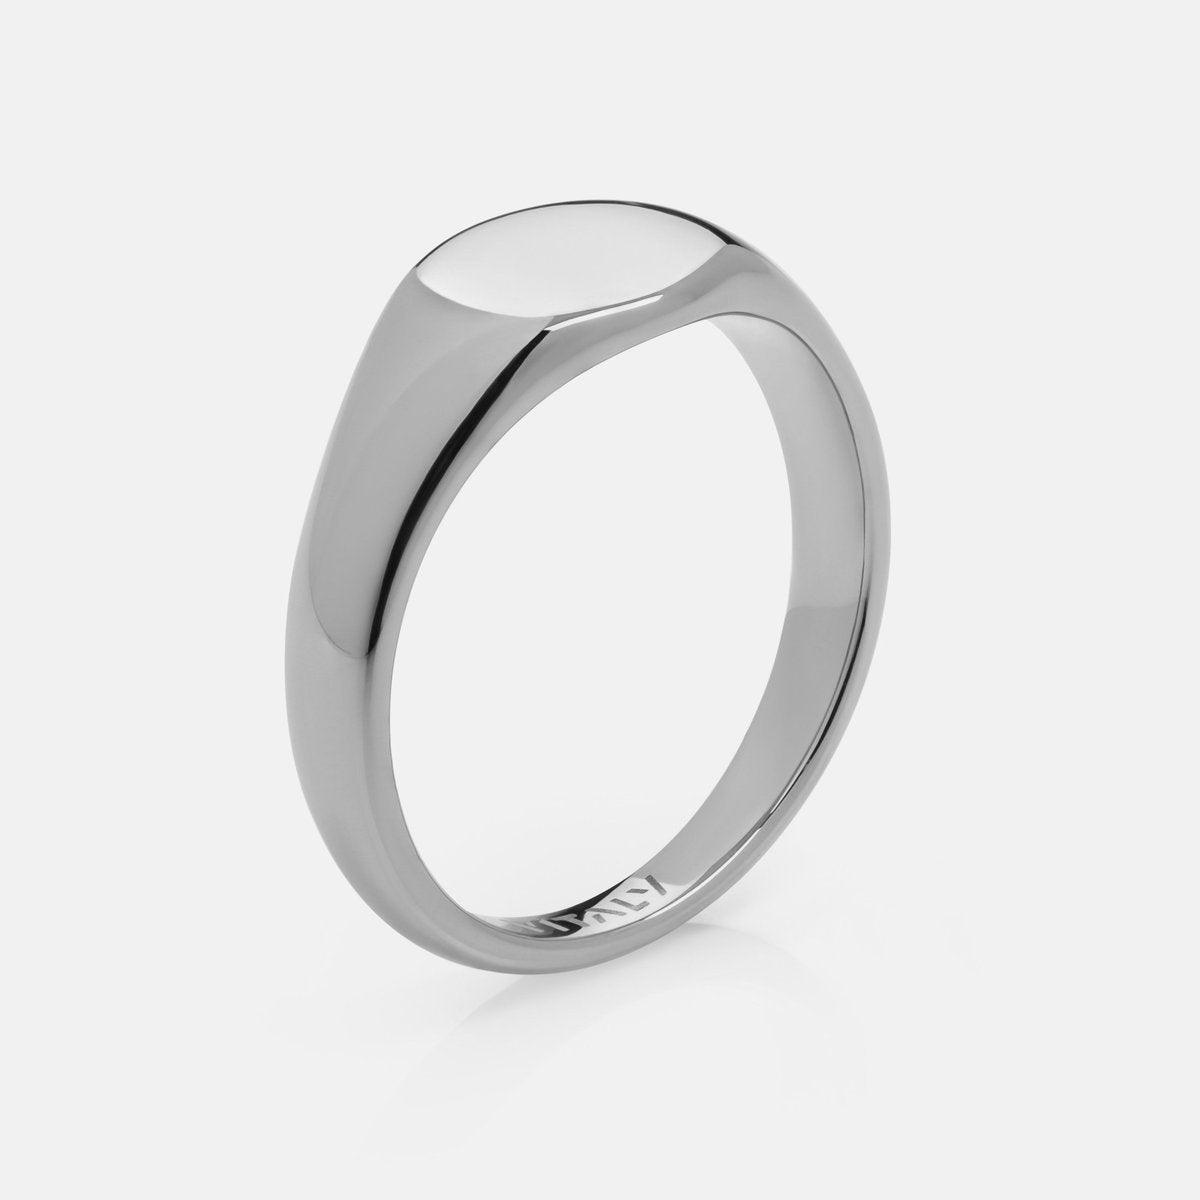 VITALY Solar Stainless Steel Ring - SUPERCONSCIOUS BERLIN